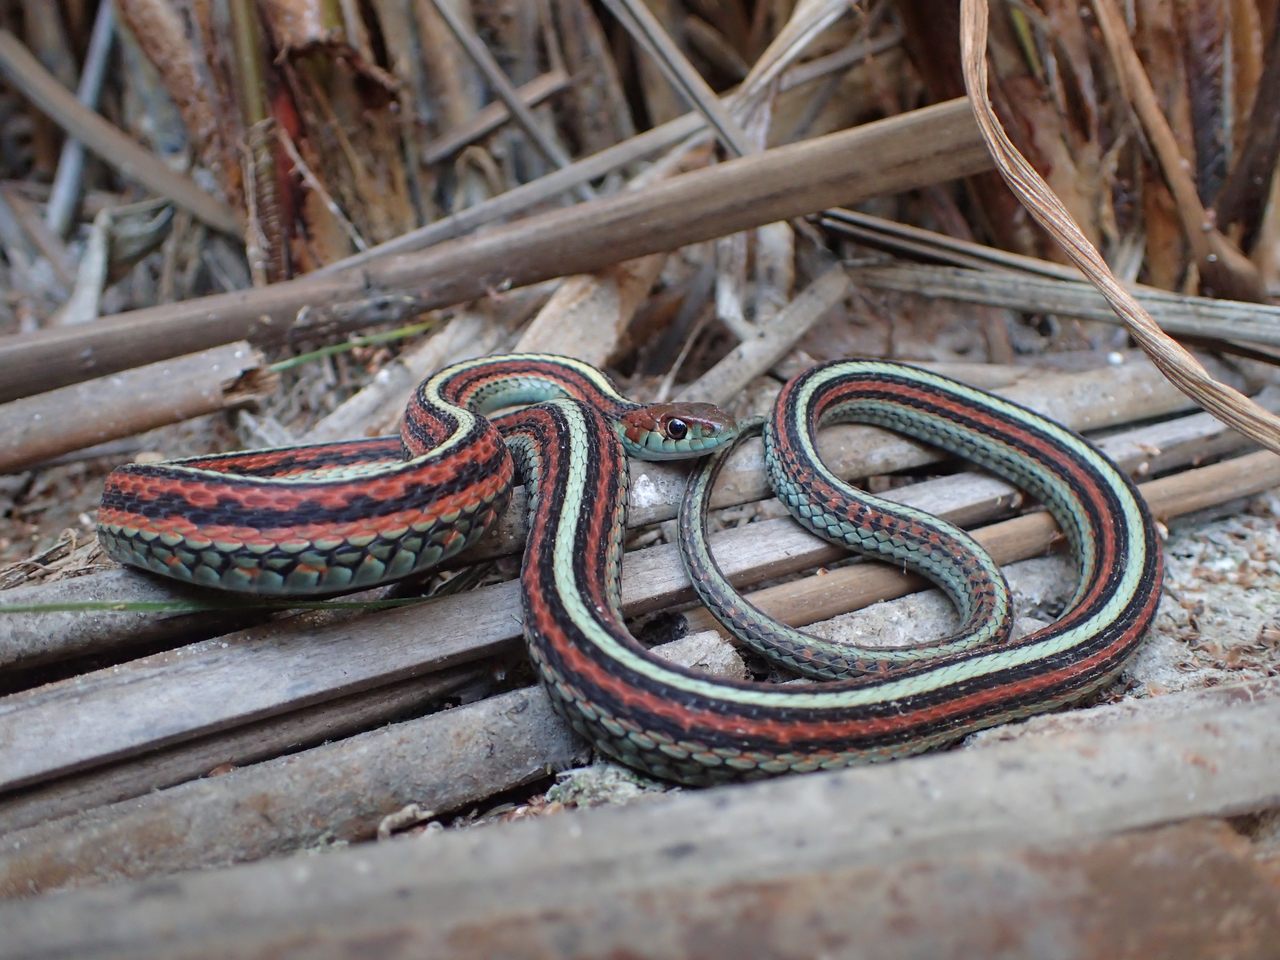 The endangered San Francisco garter snake has found a happy home at the airport thanks to a concerted conservation effort—but climate change and other challenges threaten its future.